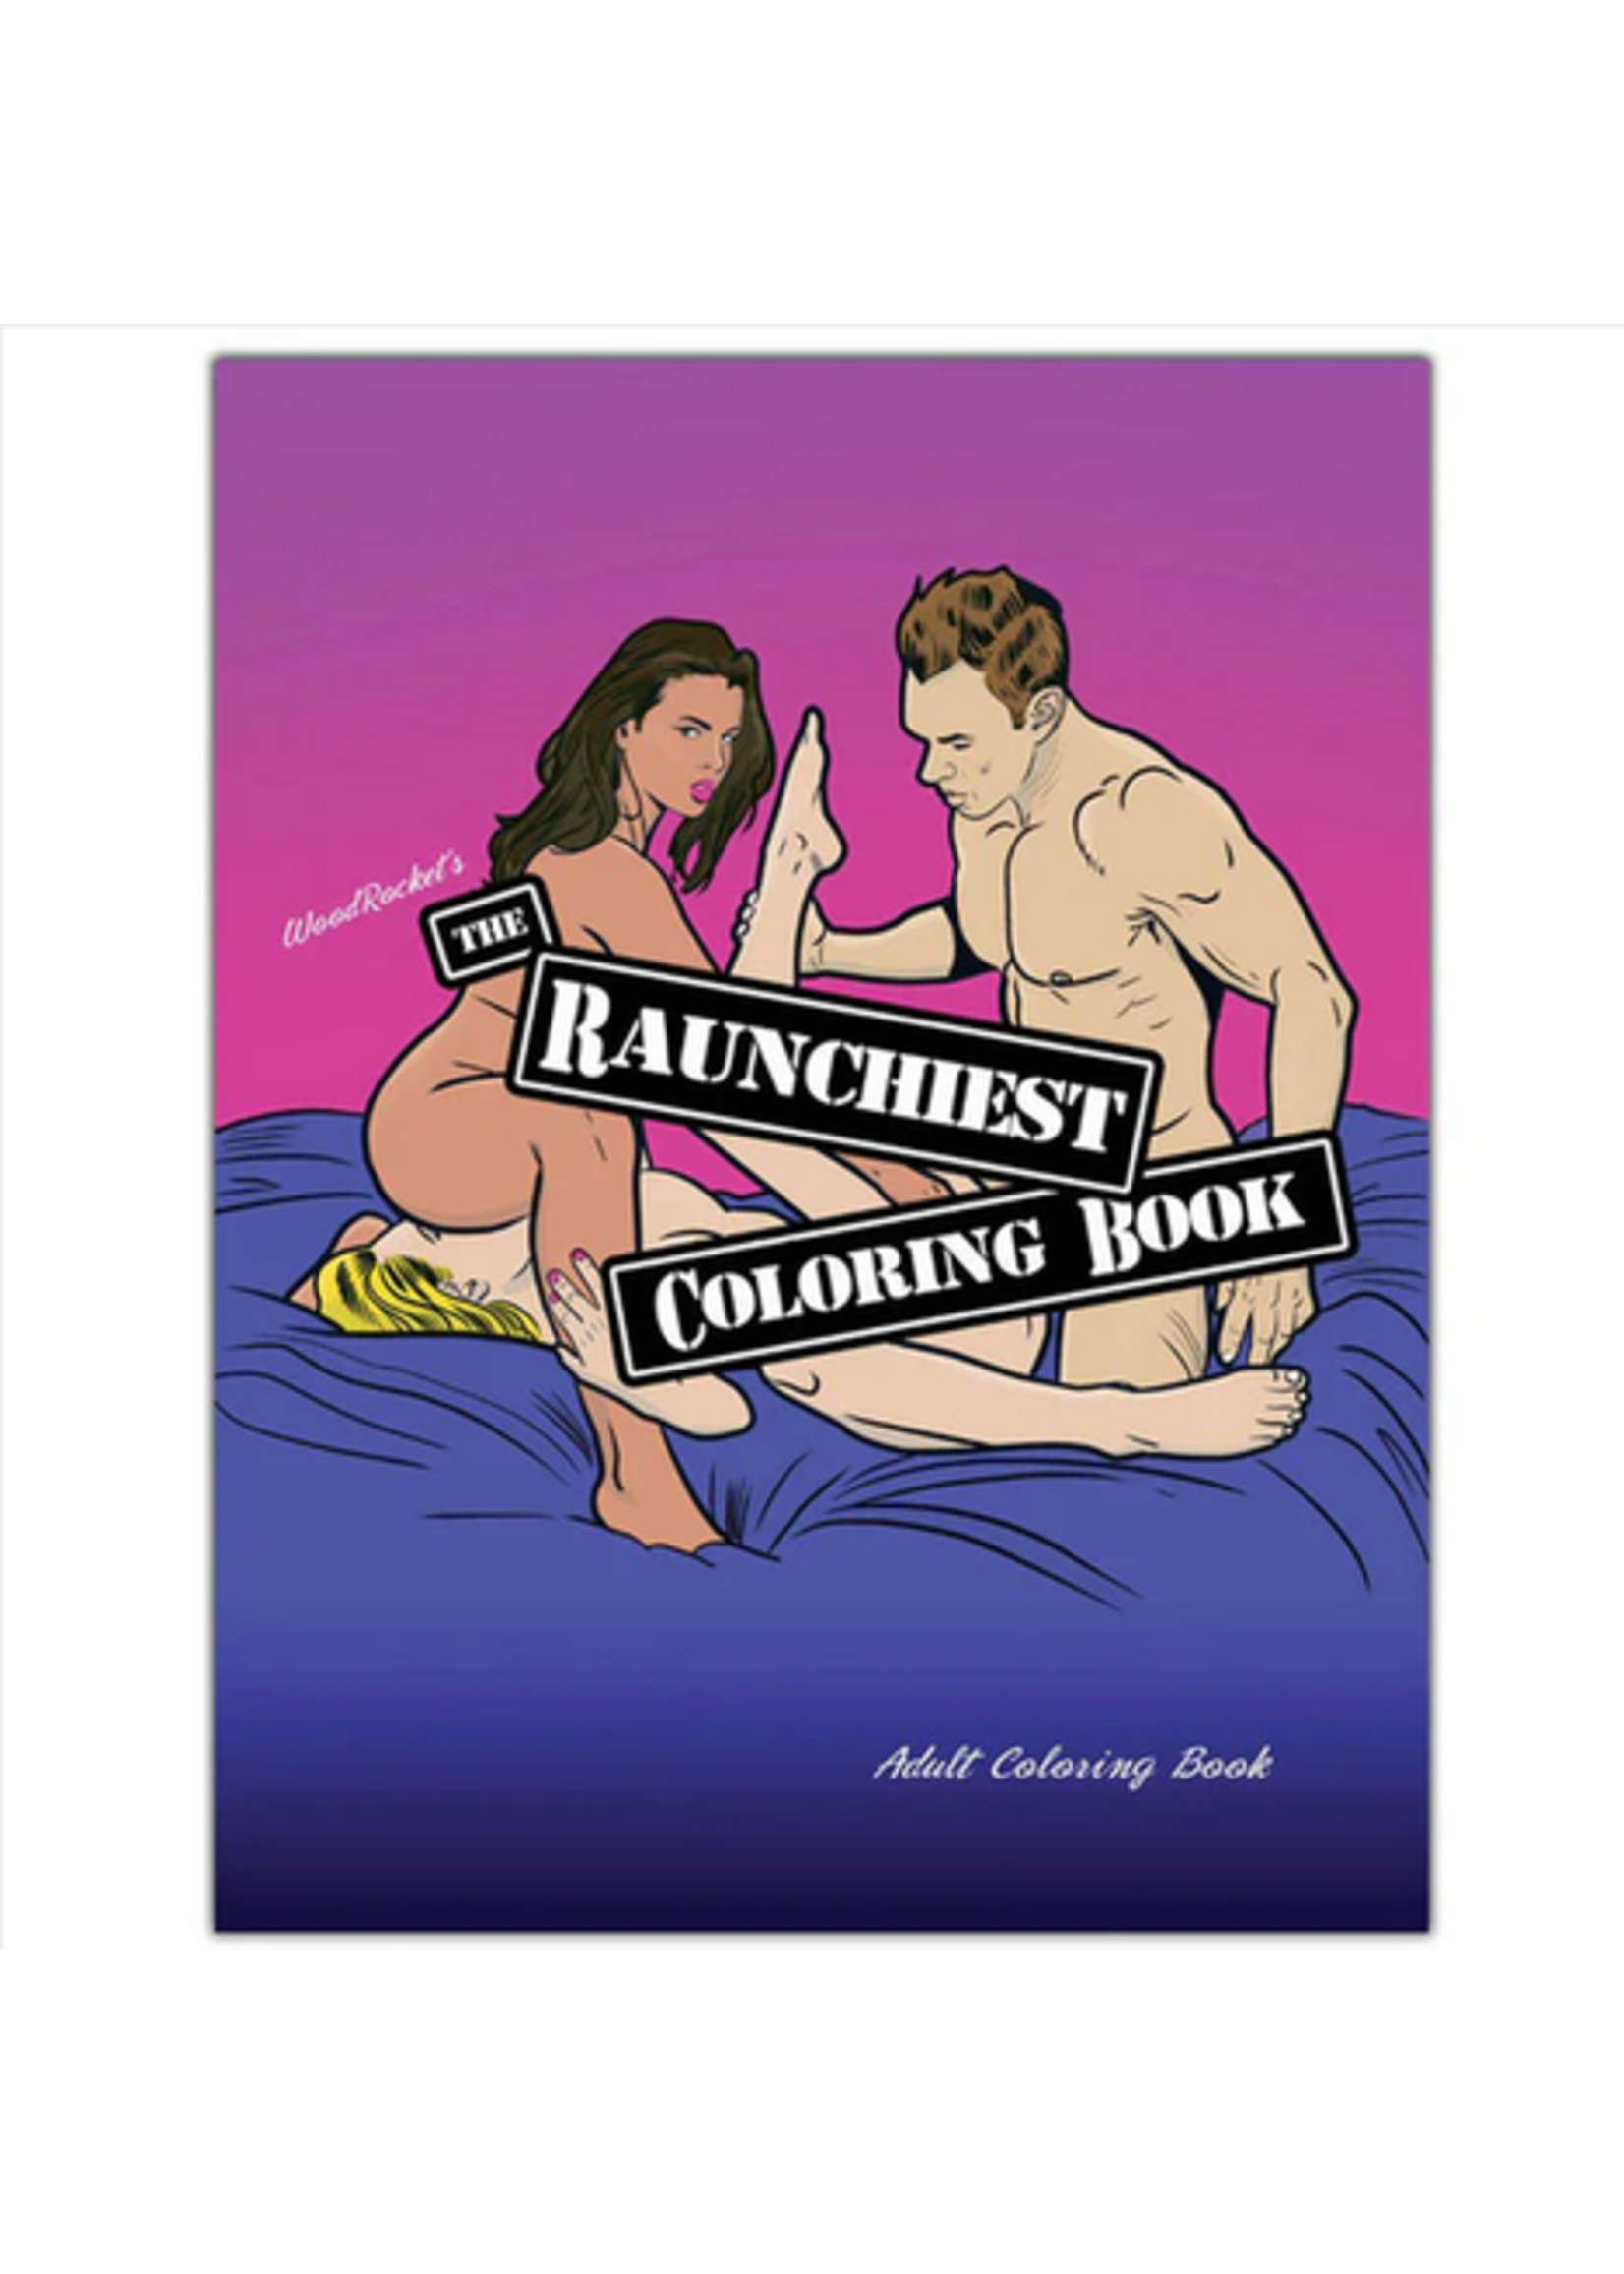 The Raunchiest Coloring Book